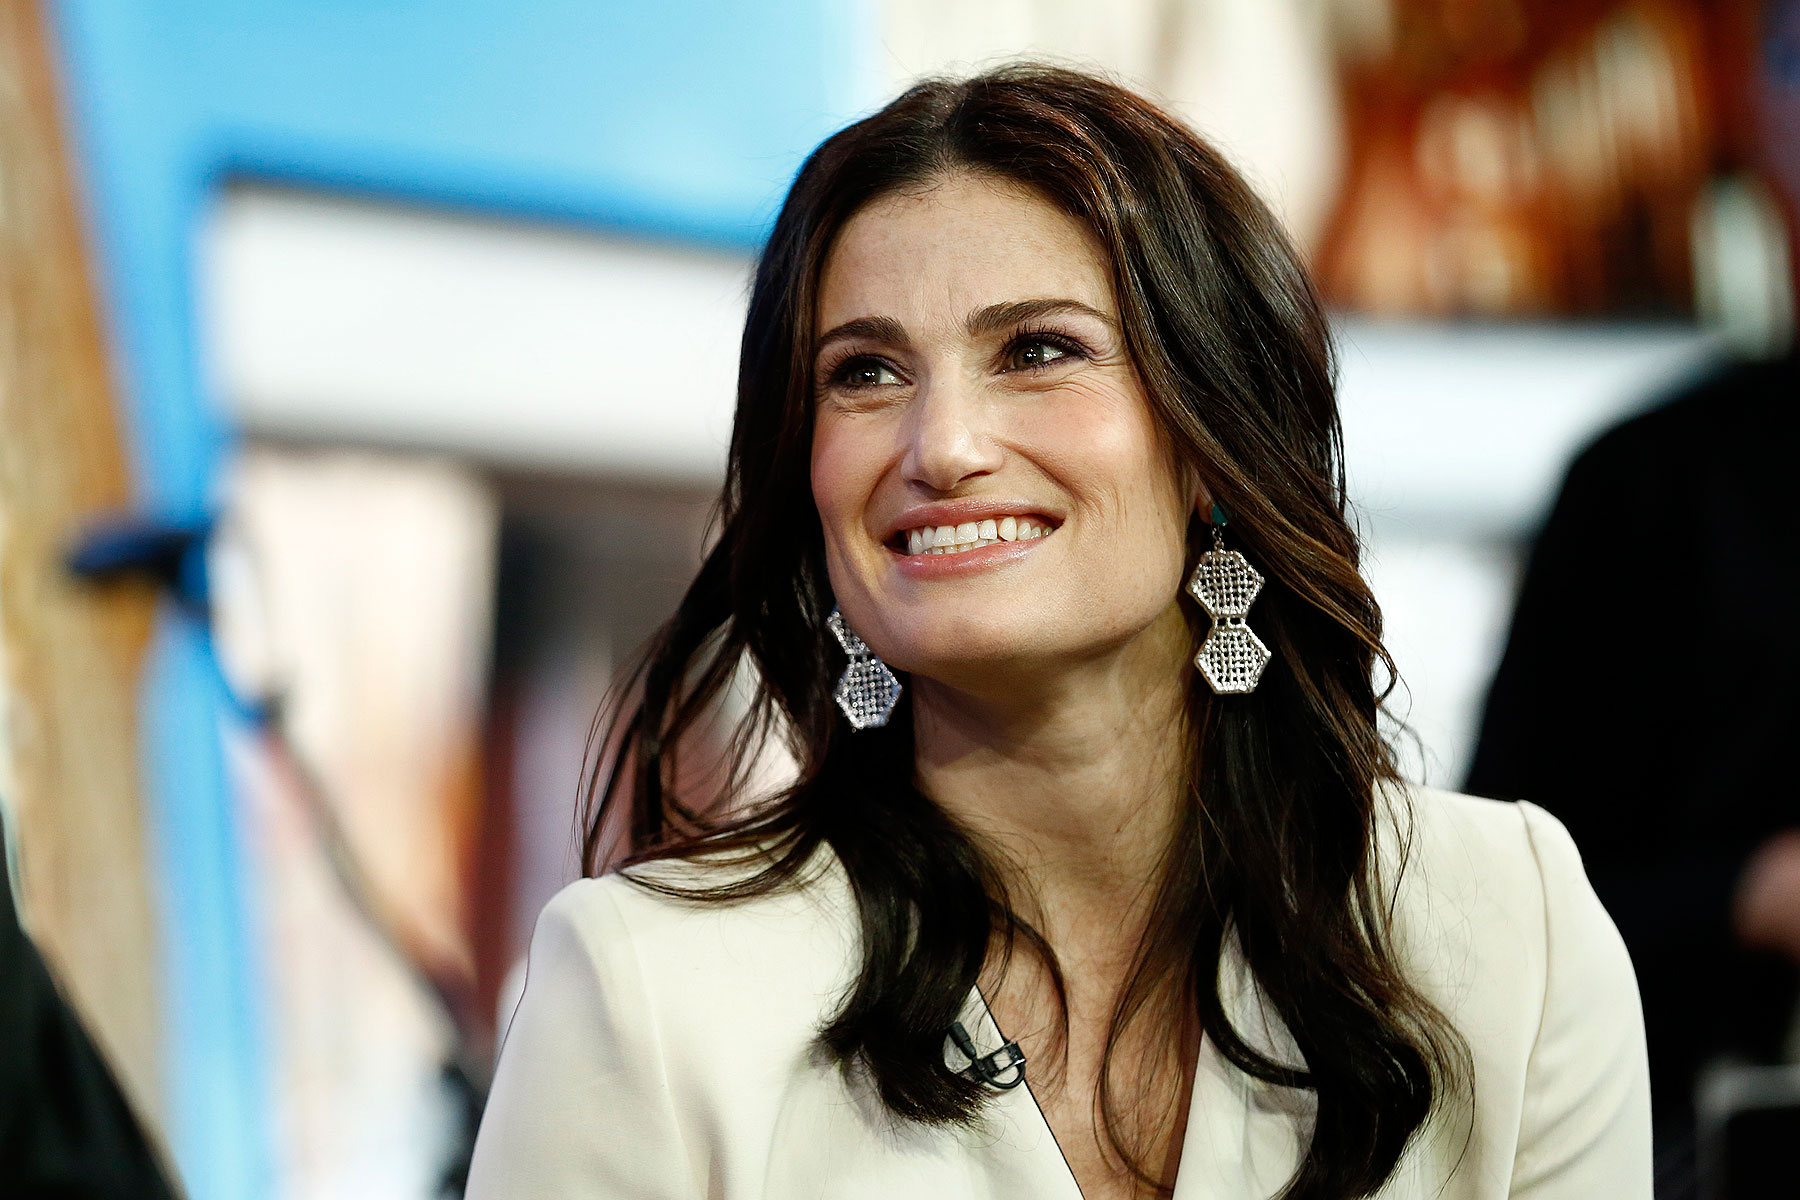 Idina Menzel appears on NBC News' <i>Today</i> show (Peter Kramer—NBC NewsWire/Getty Images)